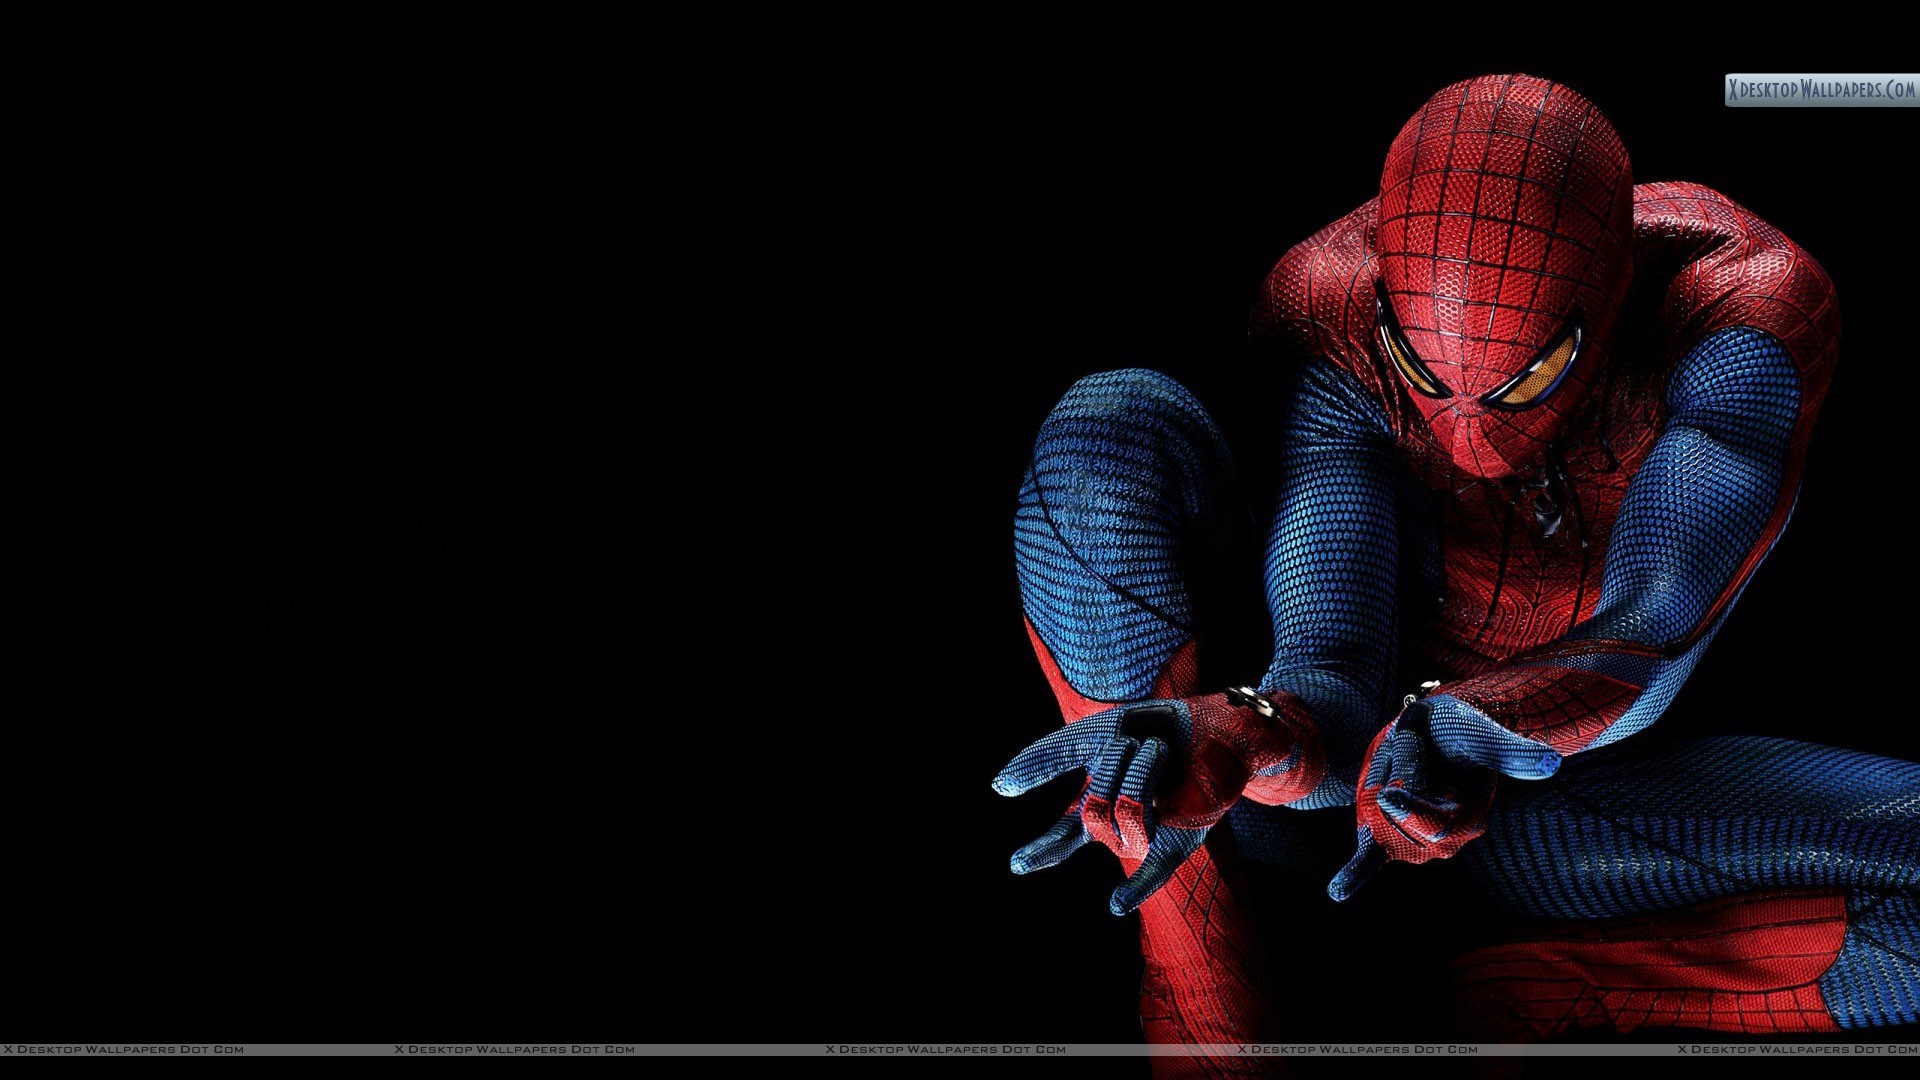 1920x1080 The Superior Spiderman HD Wallpapers Backgrounds Wallpaper 1920Ã1200  Spiderman Pics | Adorable Wallpapers | Wallpapers | Pinterest | Spiderman  pics, ...